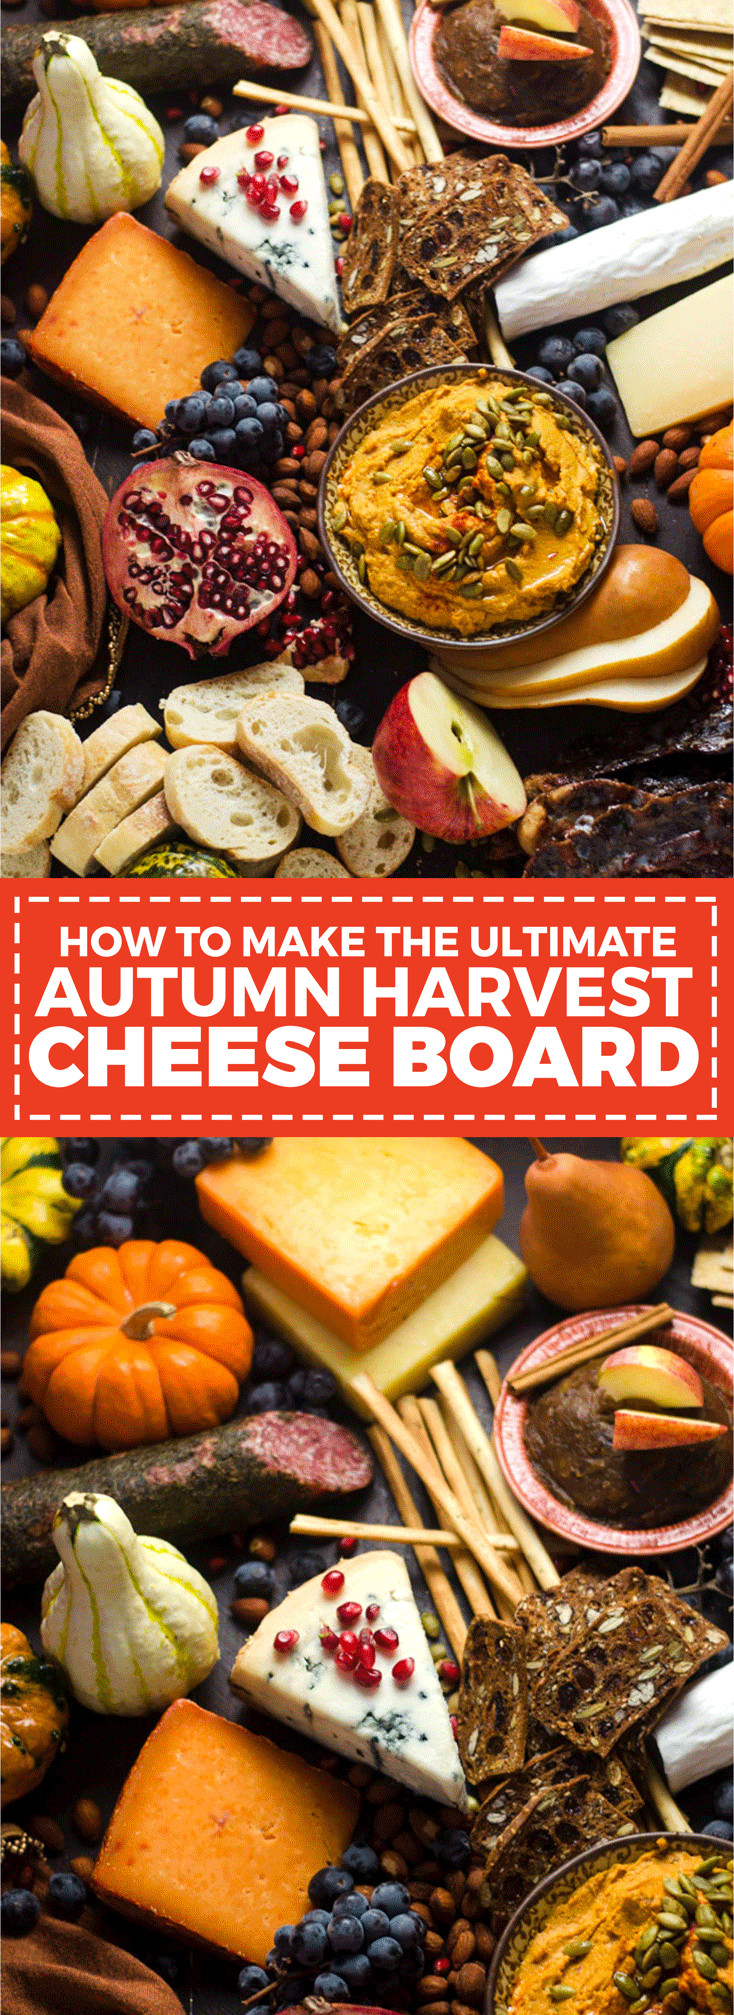 Thanksgiving Appetizers Pinterest
 How To Make The Ultimate Autumn Harvest Cheese Board